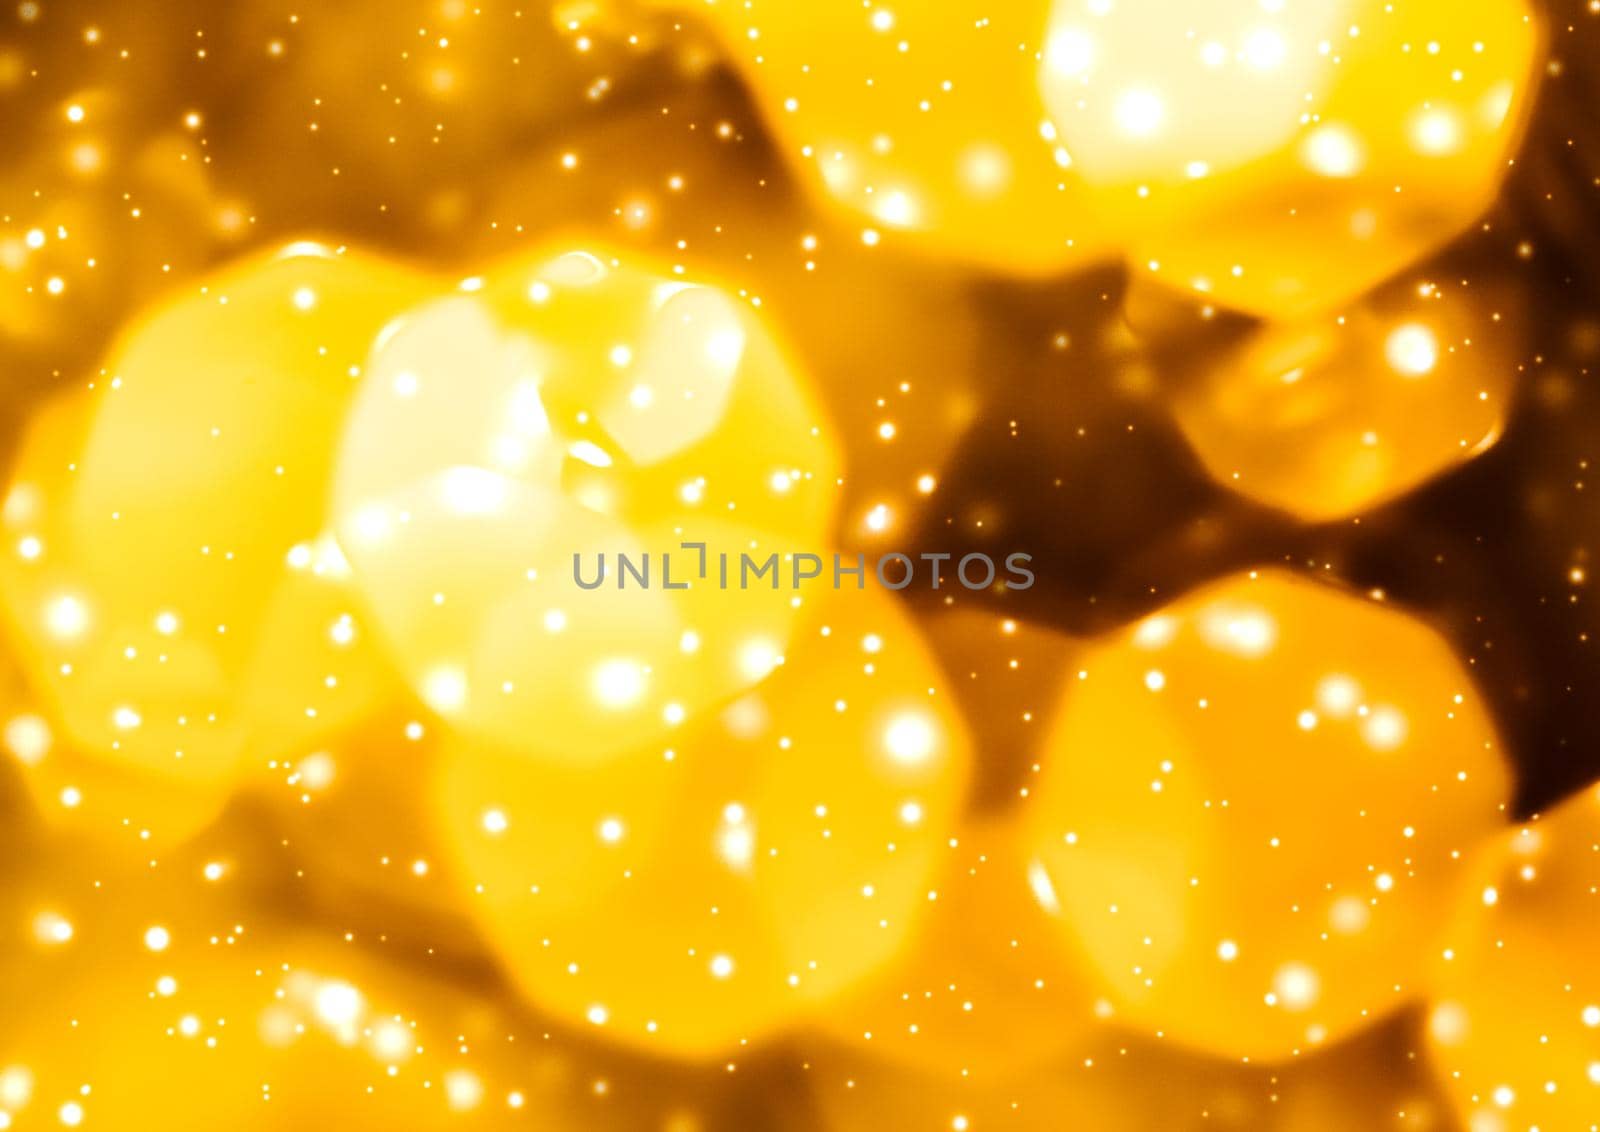 Glamorous gold shiny glow and glitter, luxury holiday background by Anneleven